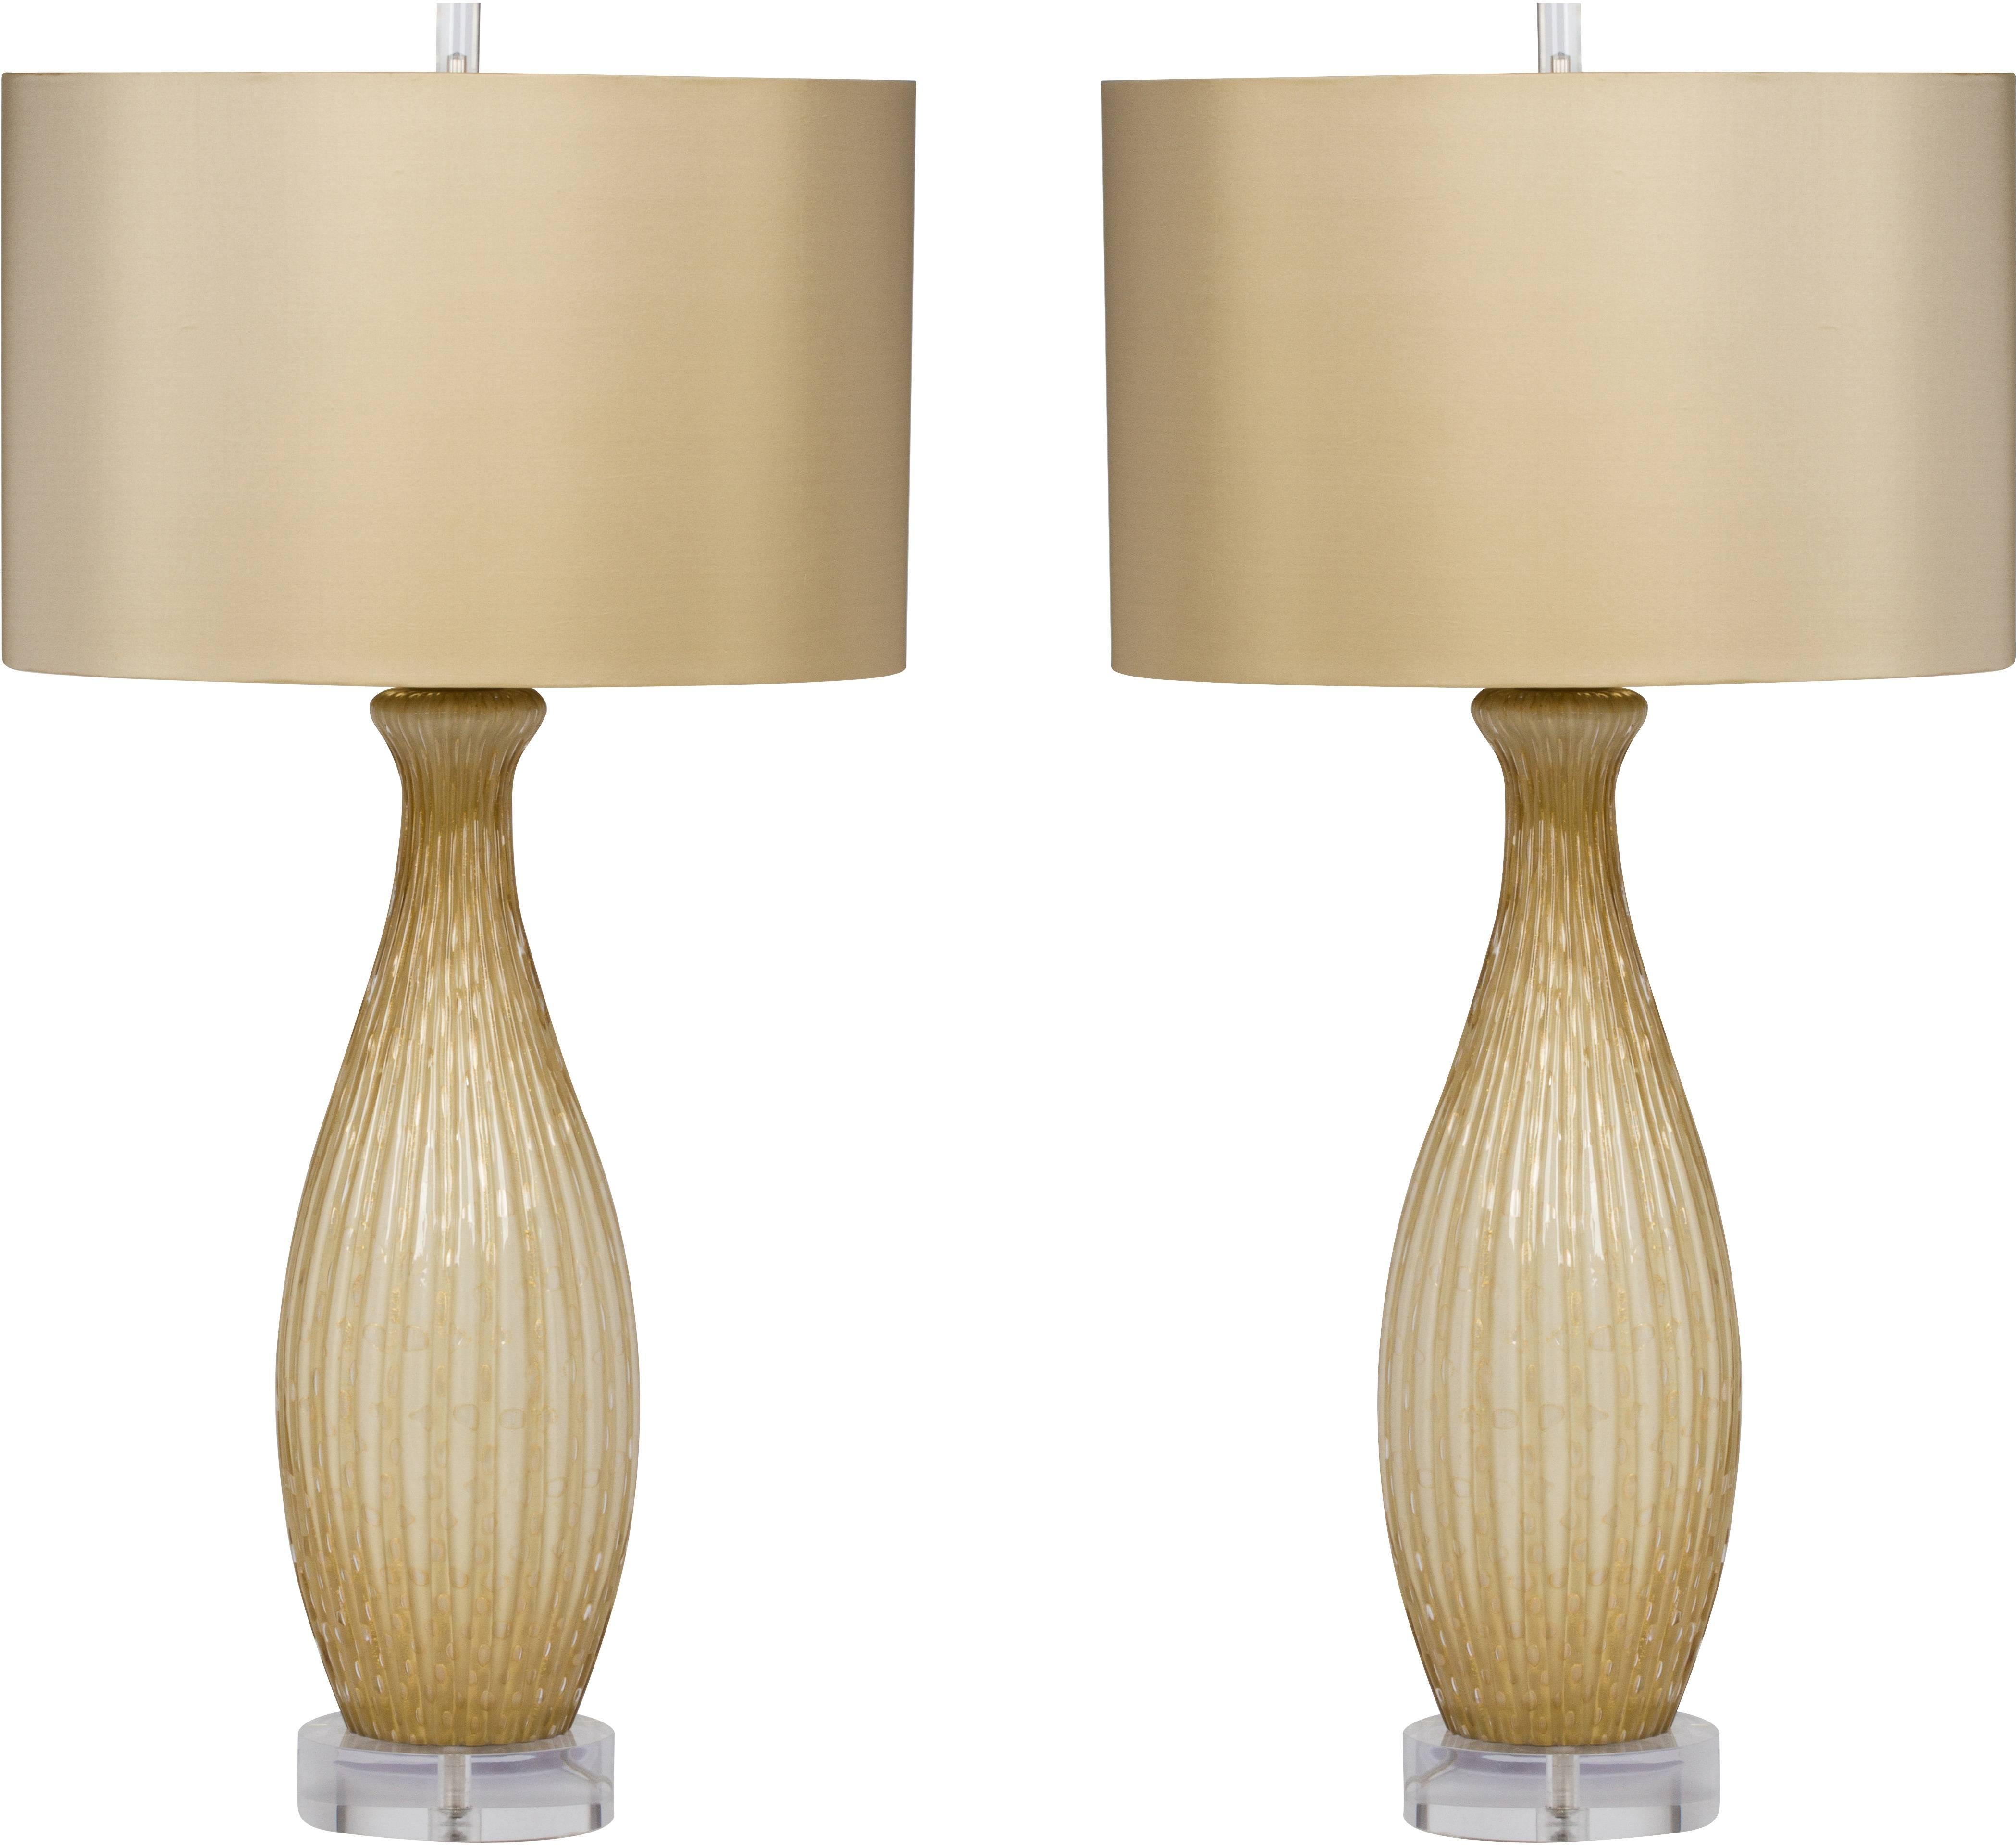 Spectacular Pair of Murano Glass Lamps in the Style of Barovier & Toso